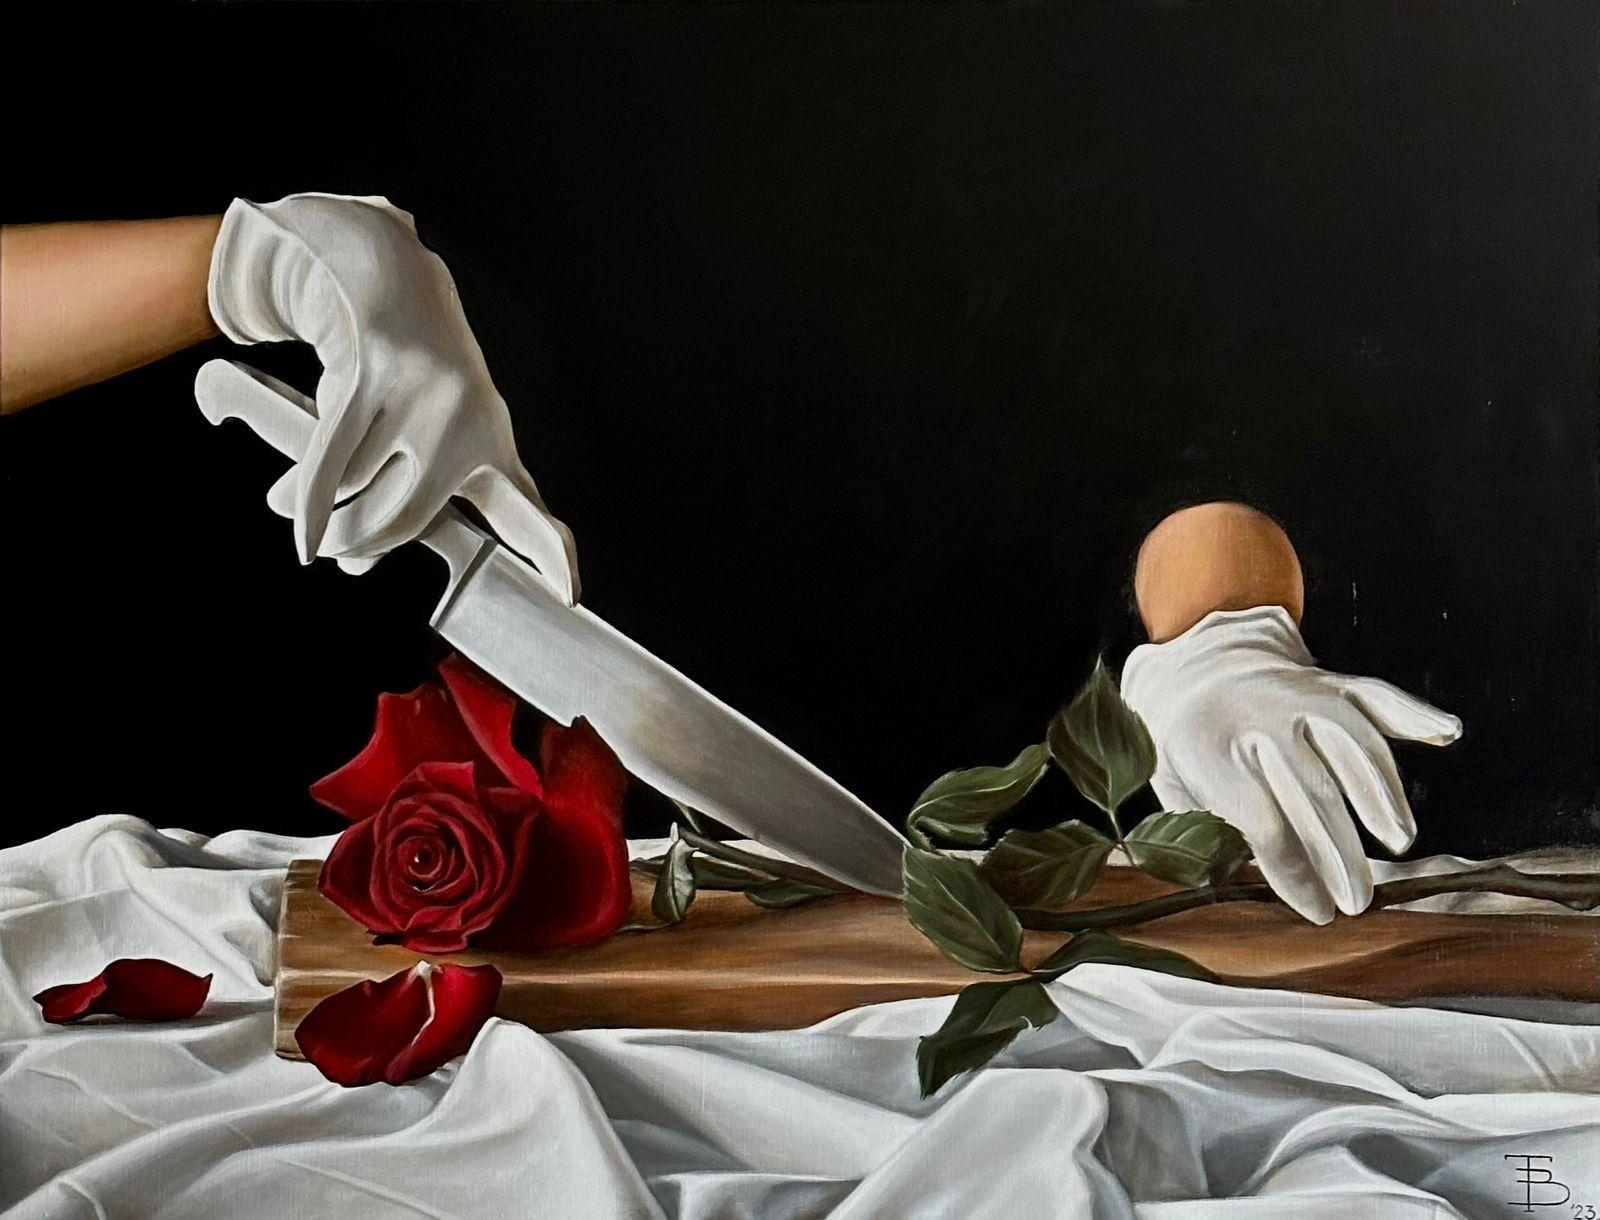 Cooking Lessons, 100x130cm